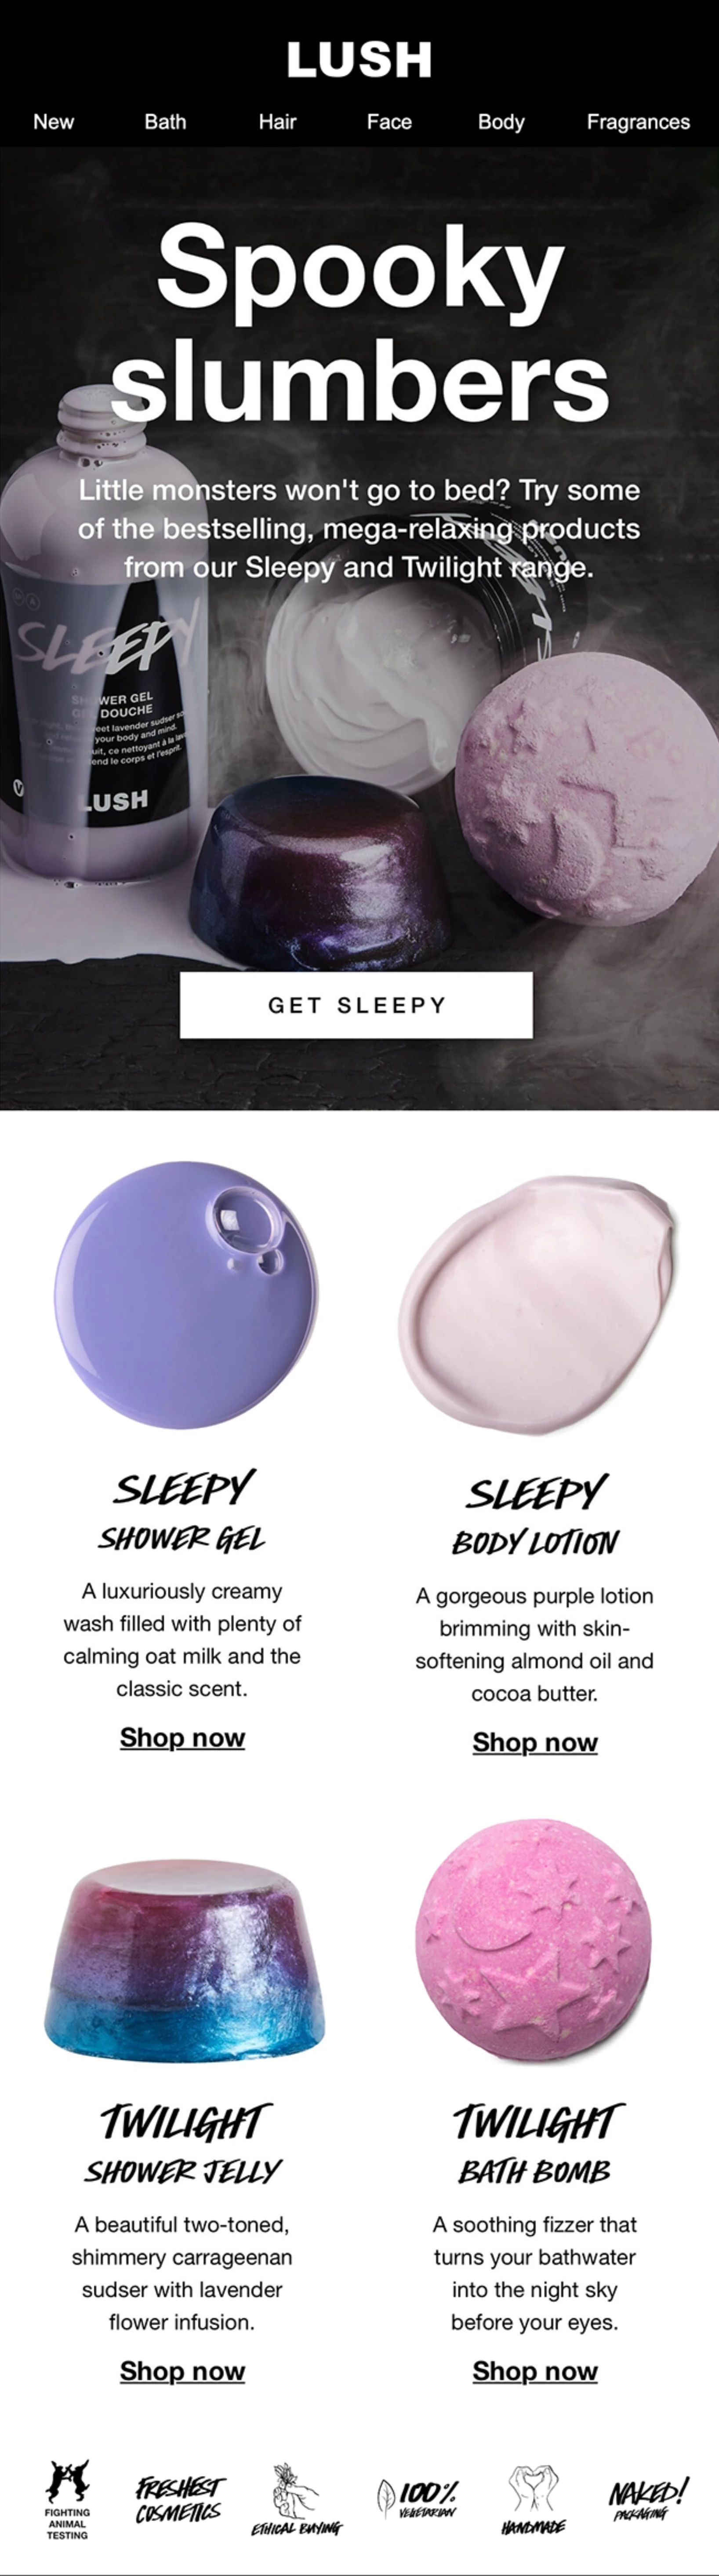 Halloween email newsletter from Lush